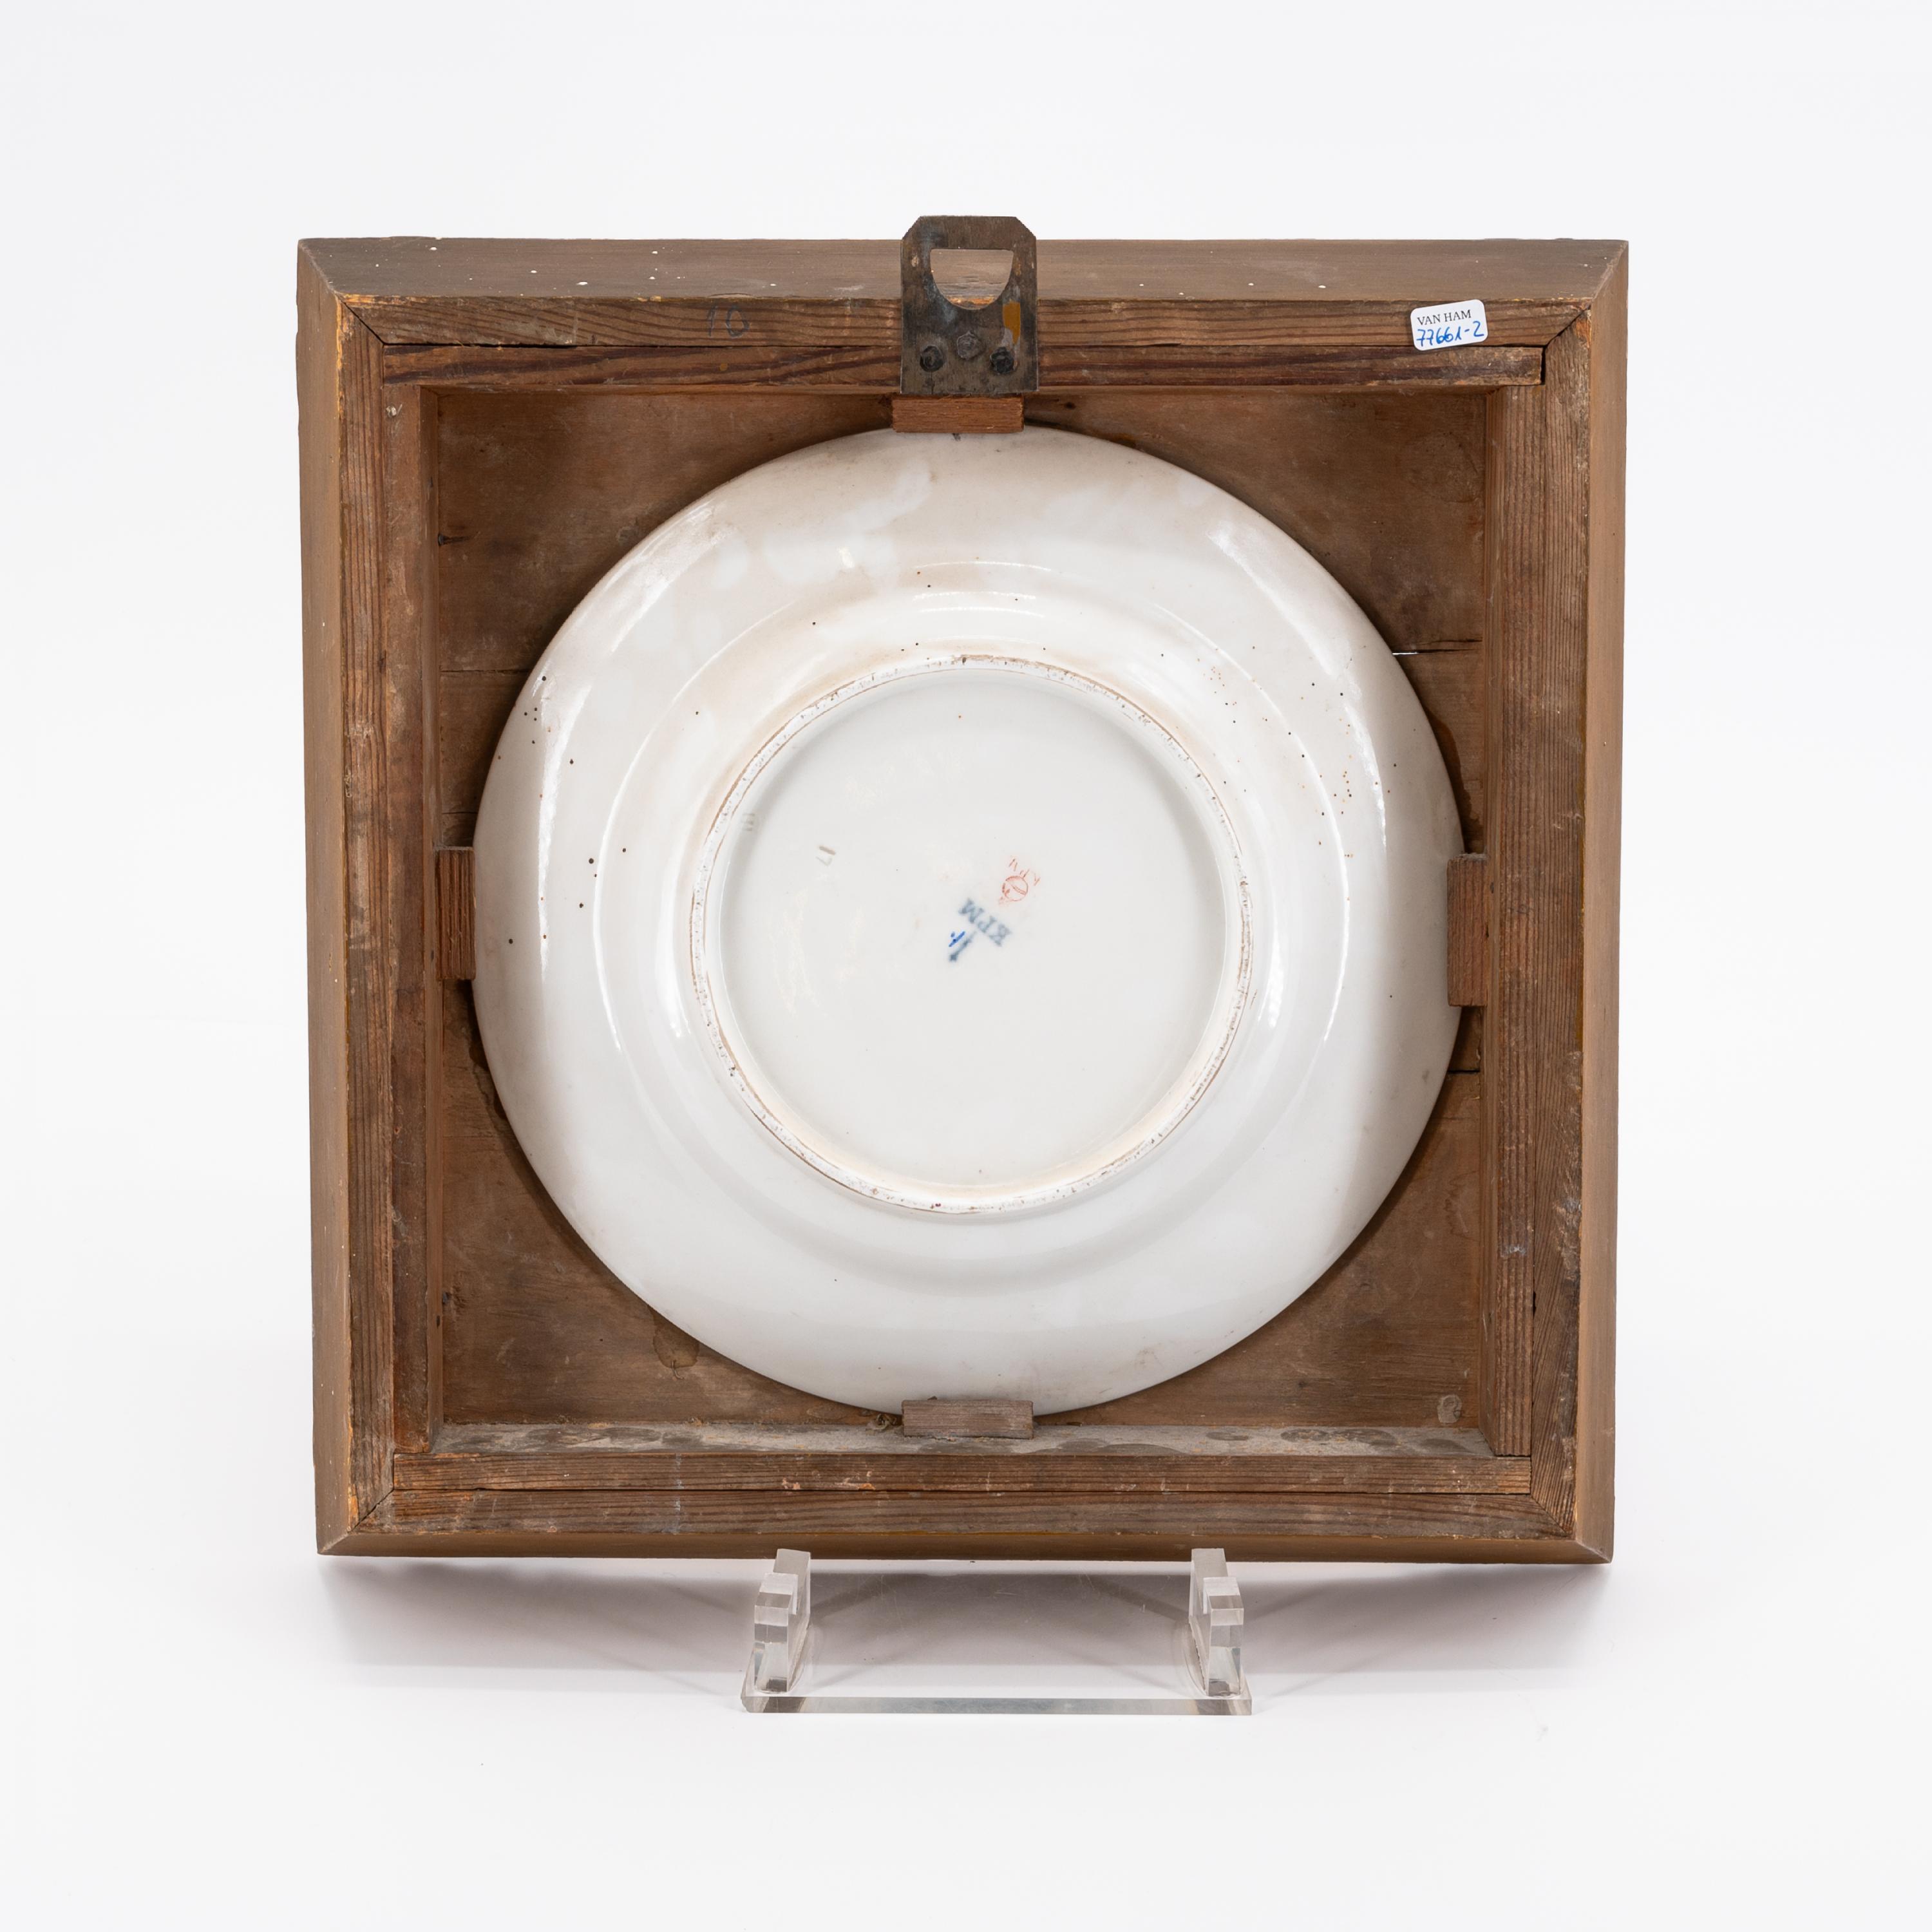 EXEPTIONAL SERIES OF TWELVE PORCELAIN PLATES WITH ROMANTIC VIEWS OF THE RHINE - Image 8 of 26